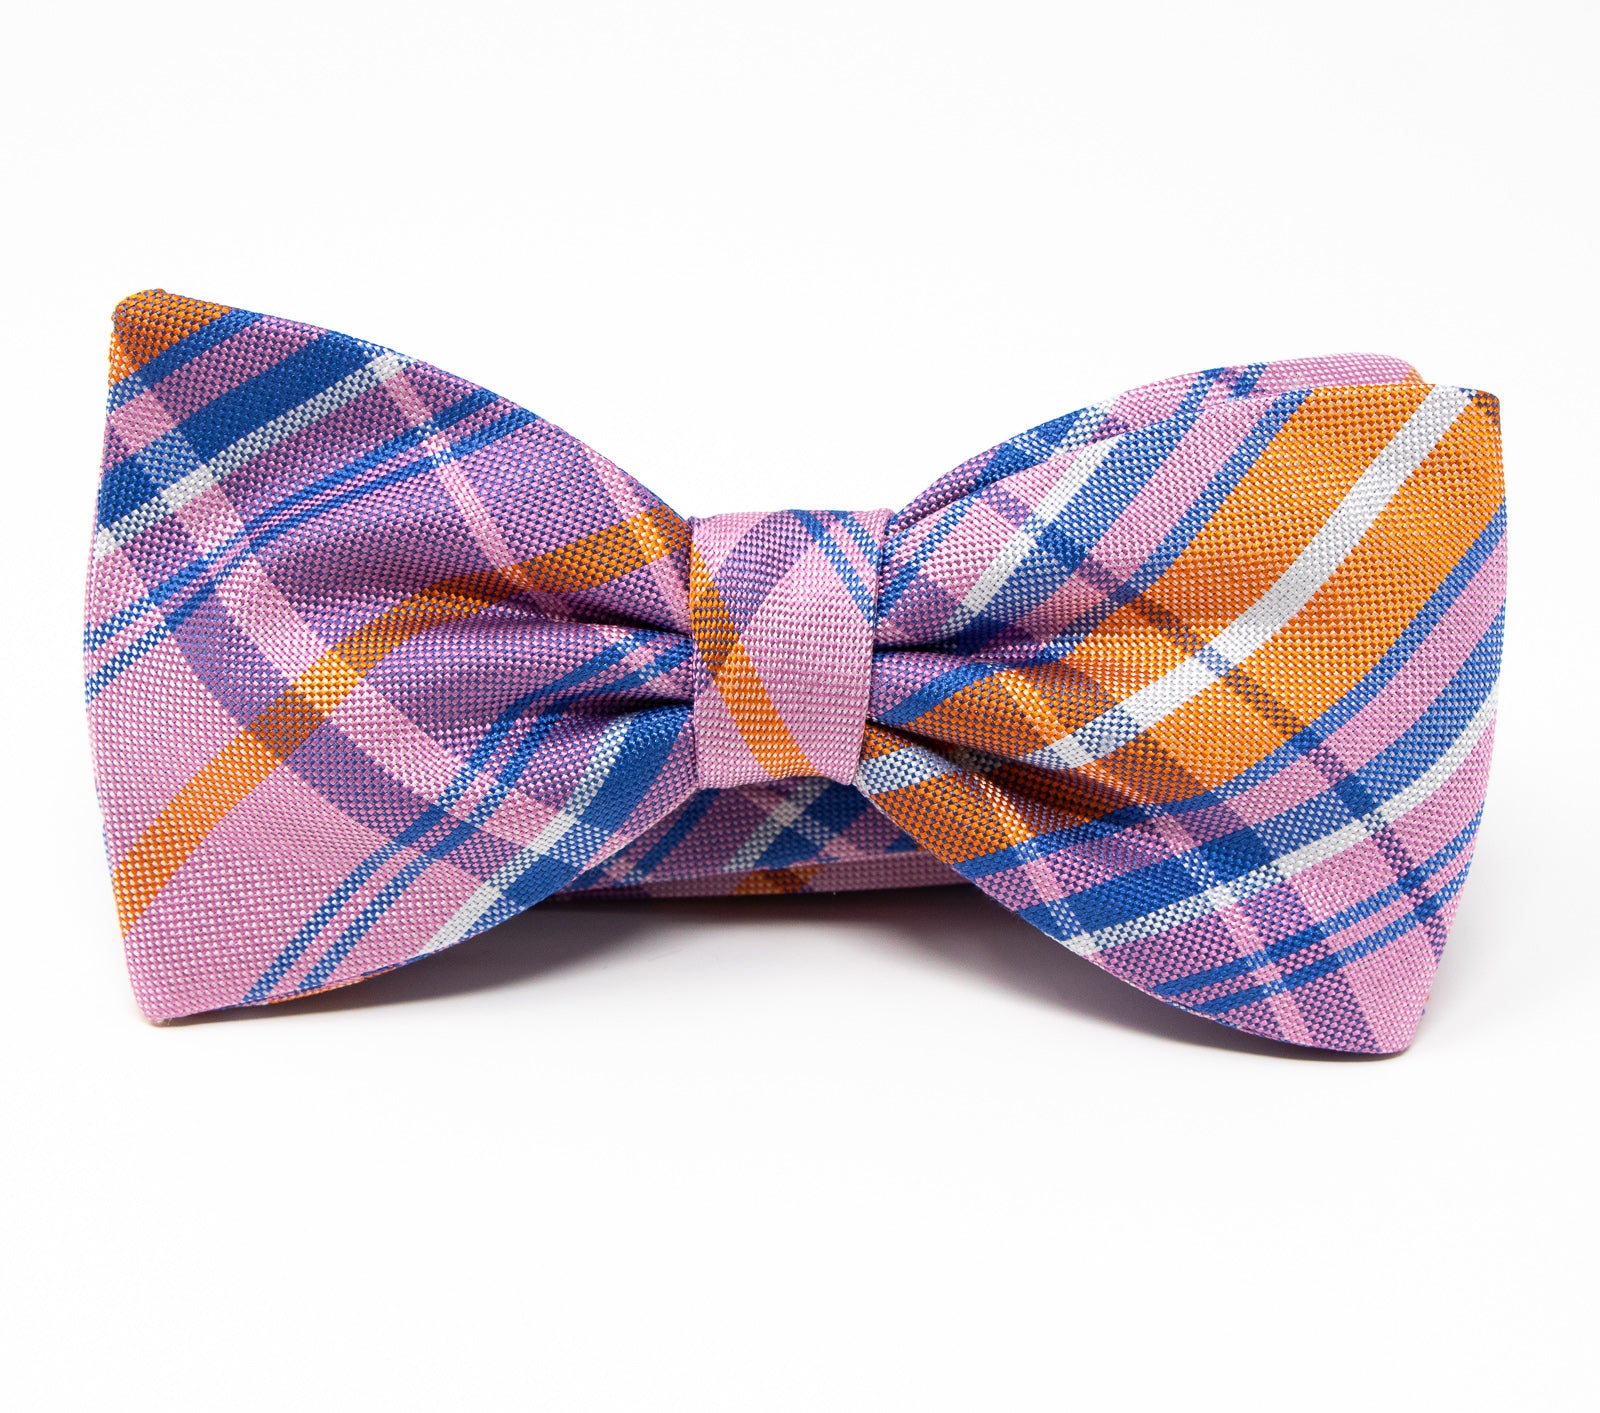 Summertime Bow Tie - Premium Youth Size - Pre-Tied - H-Bomb Ties Ltd